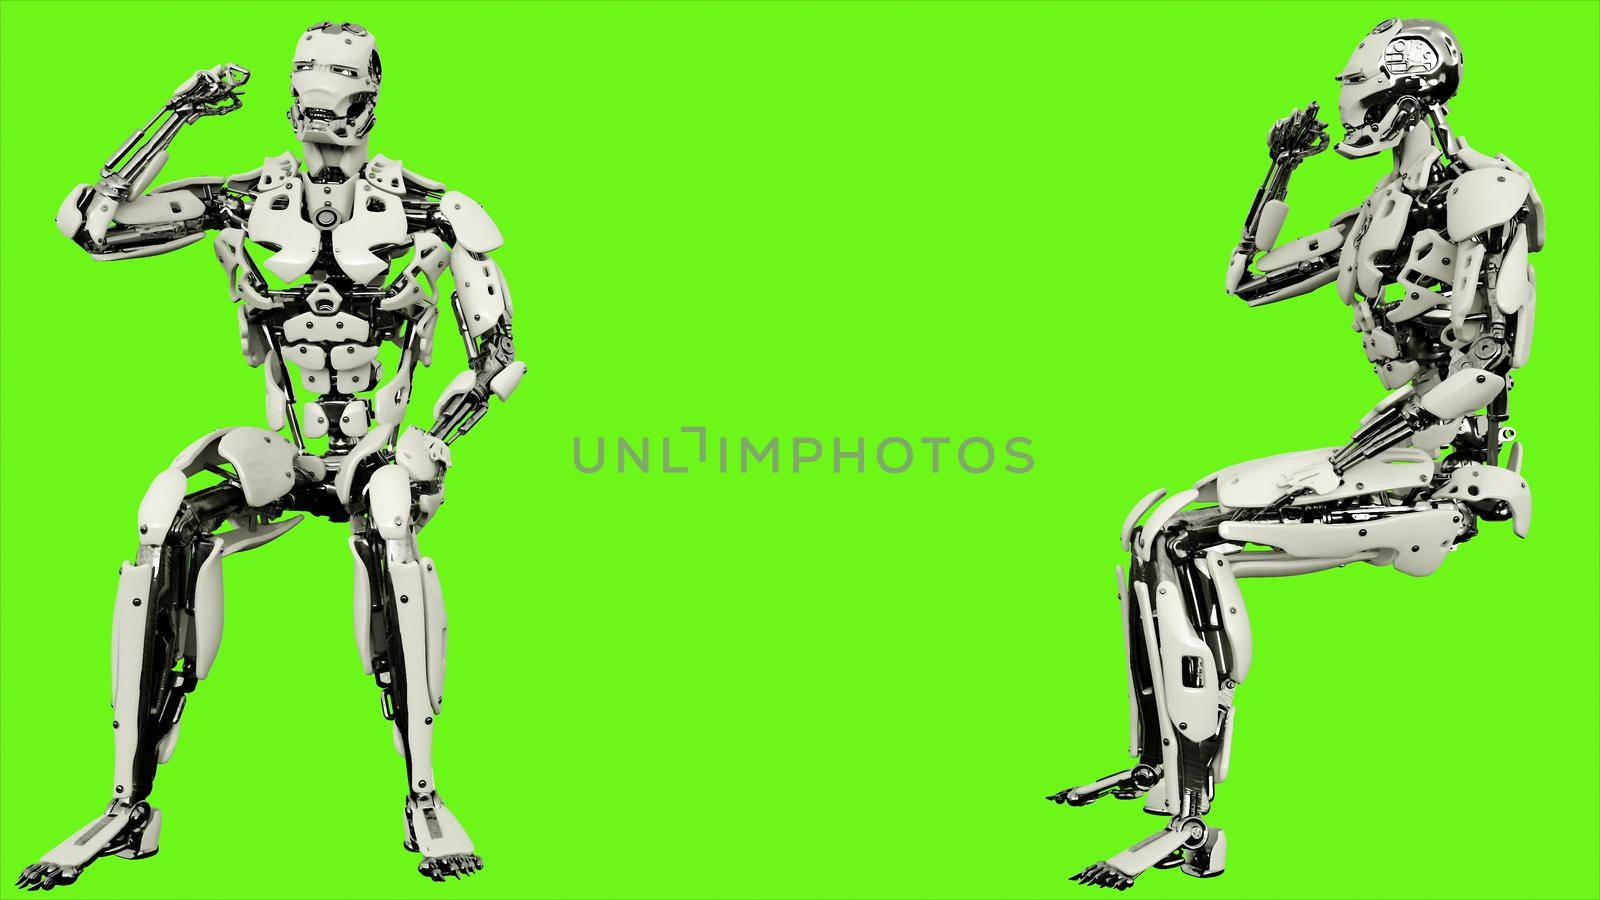 Robot android is emotionally reacts and waves fist. Illustration on green screen background.